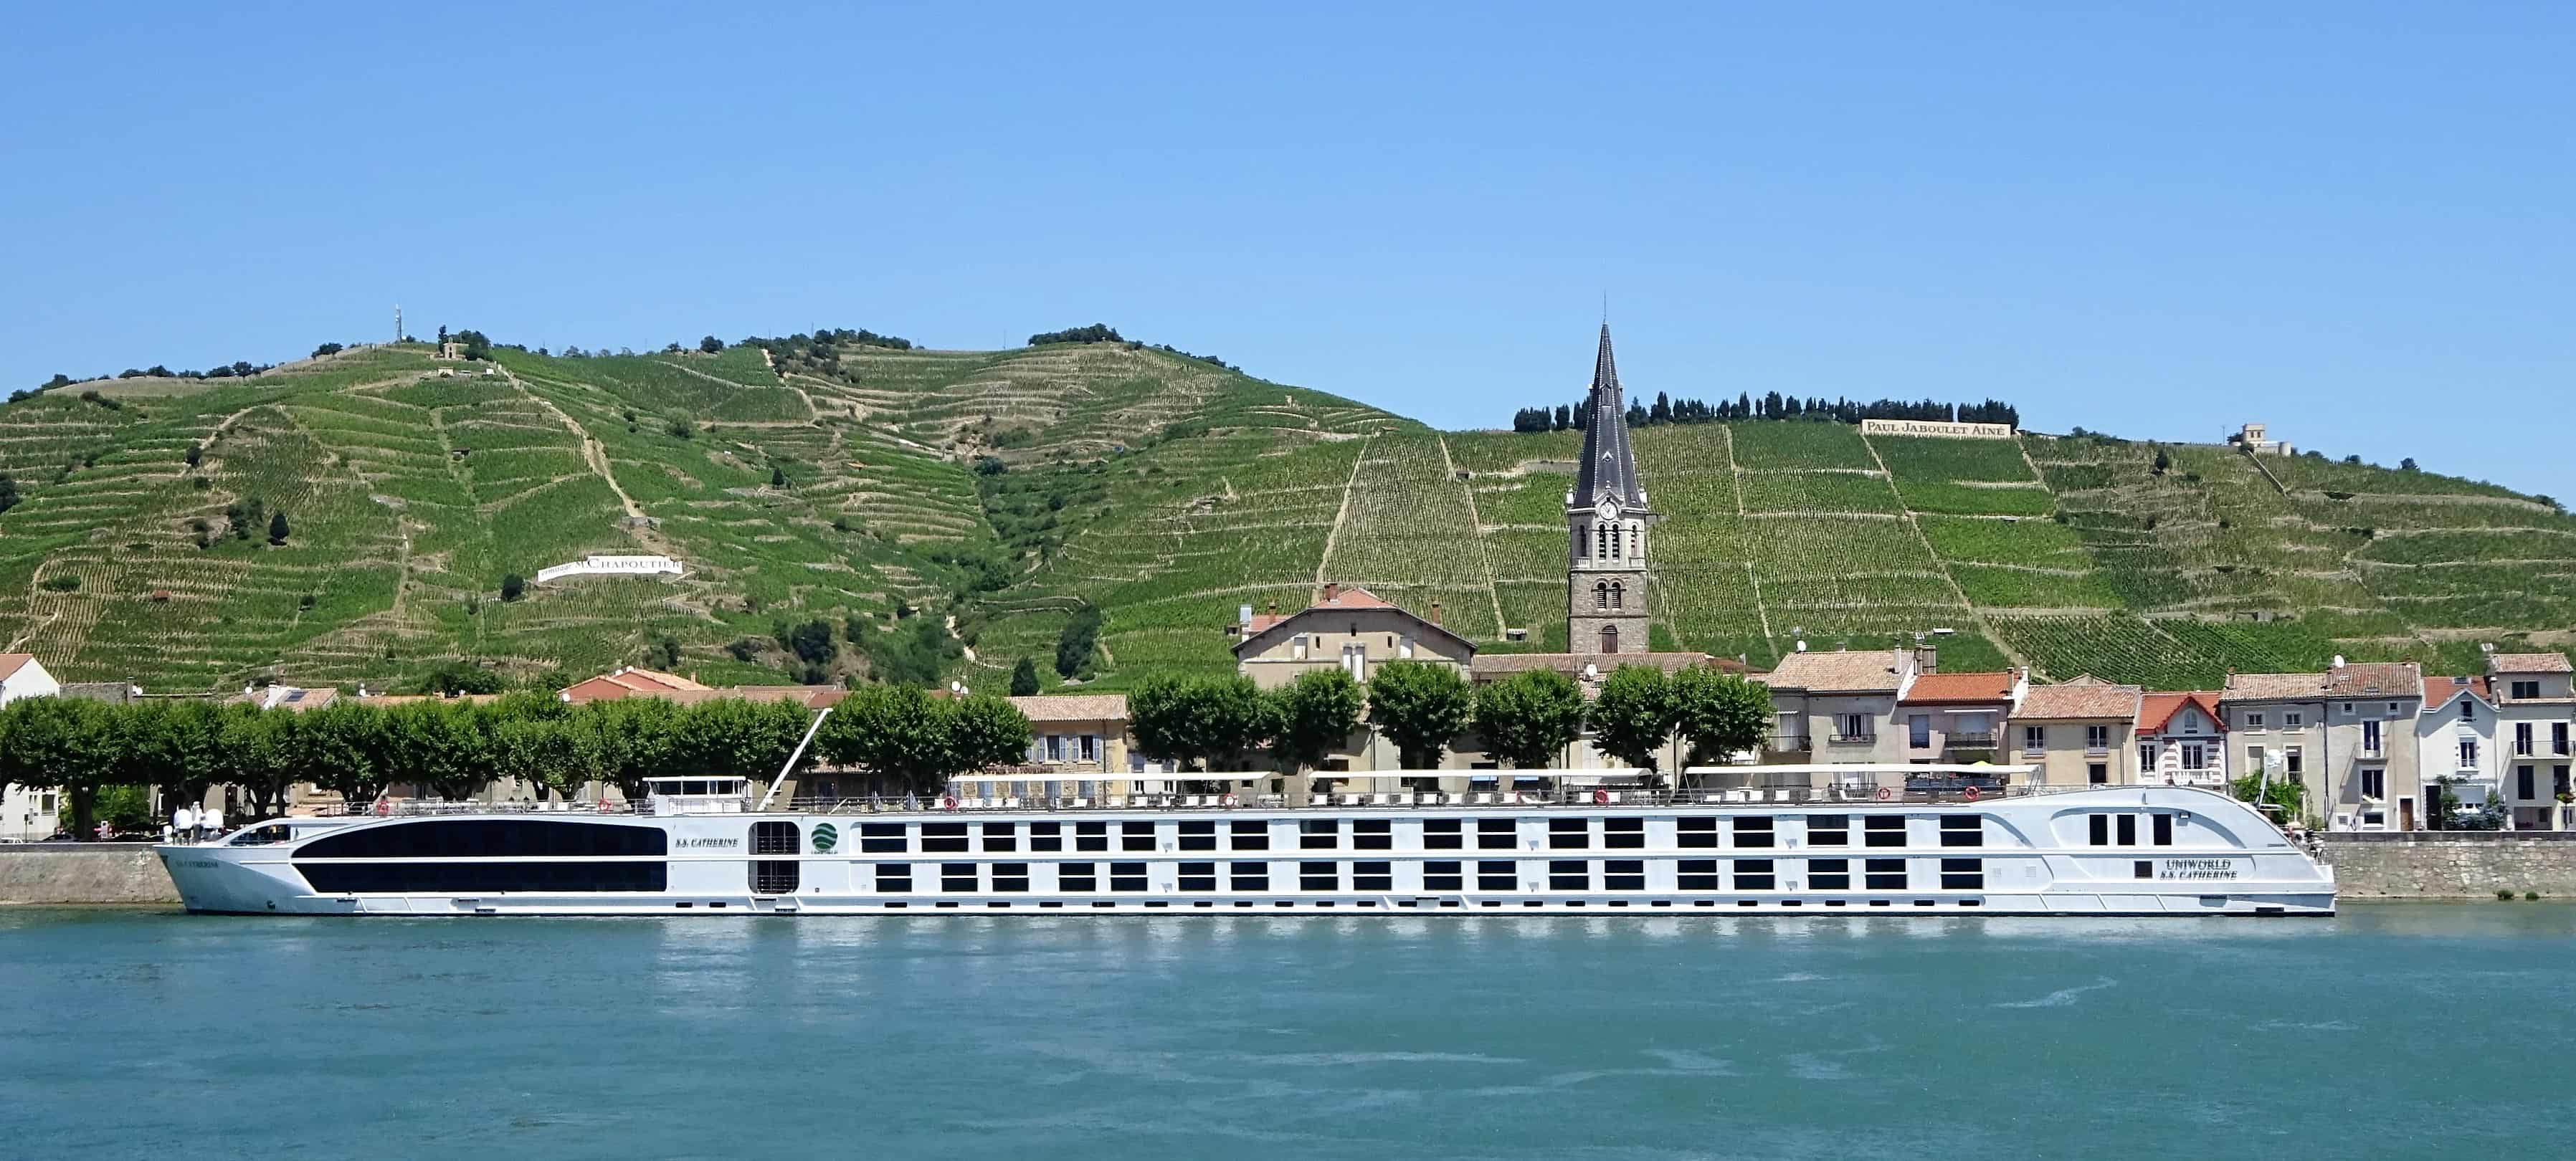 Uniworld River Cruises special offer from 1,399 for 2016 and 2017